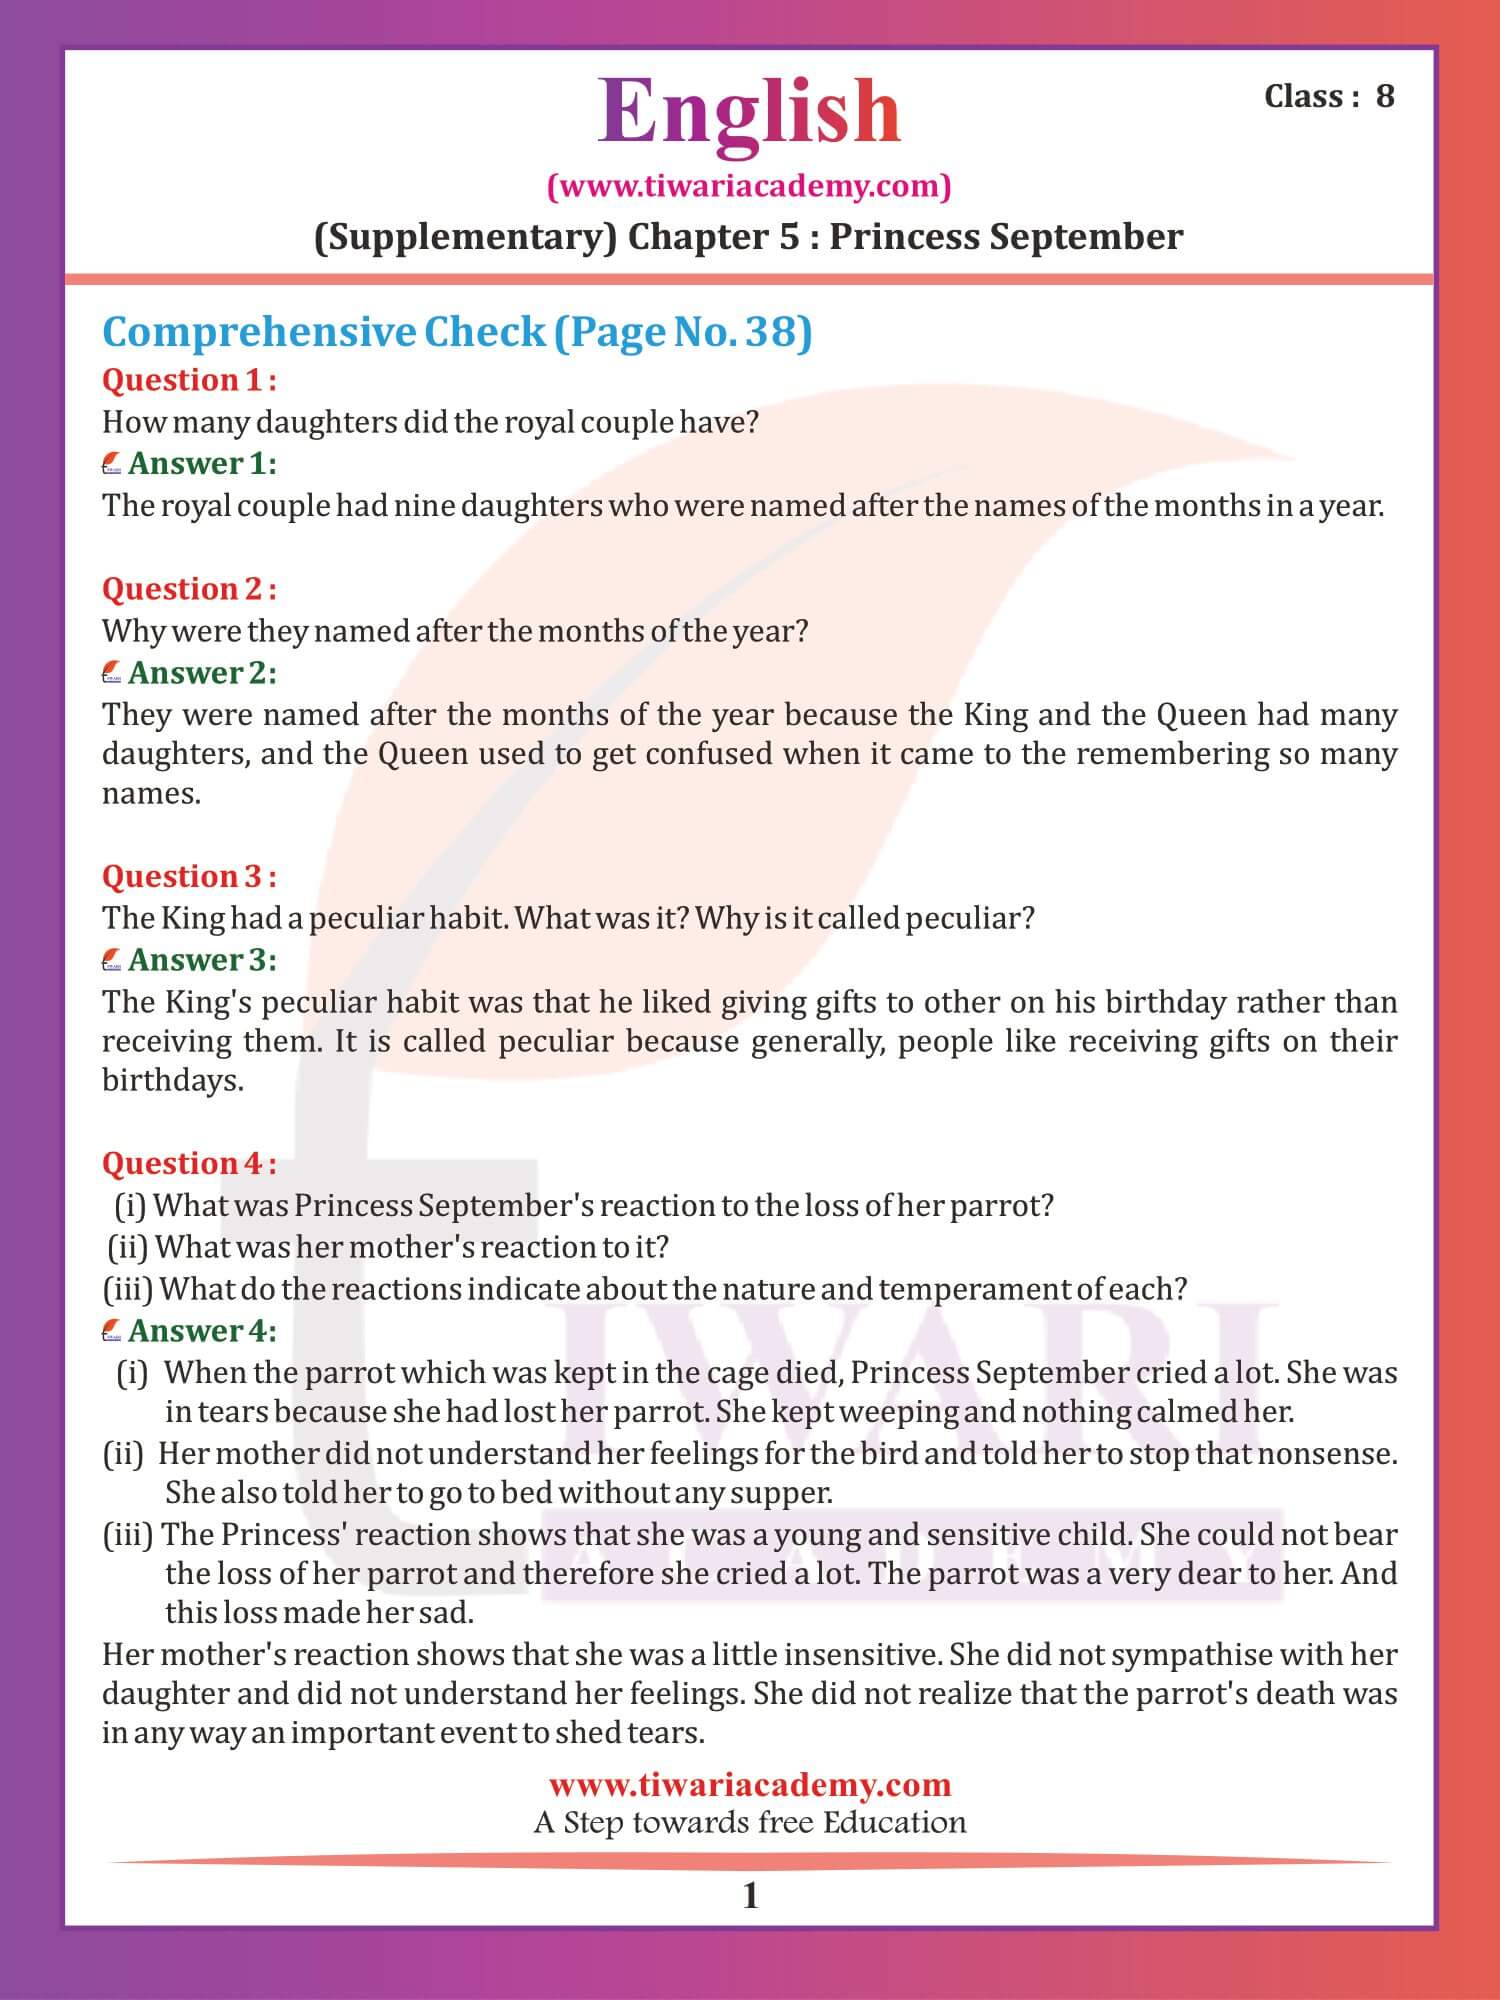 NCERT Solutions for Class 8 English Supplementary Chapter 5 Princess September